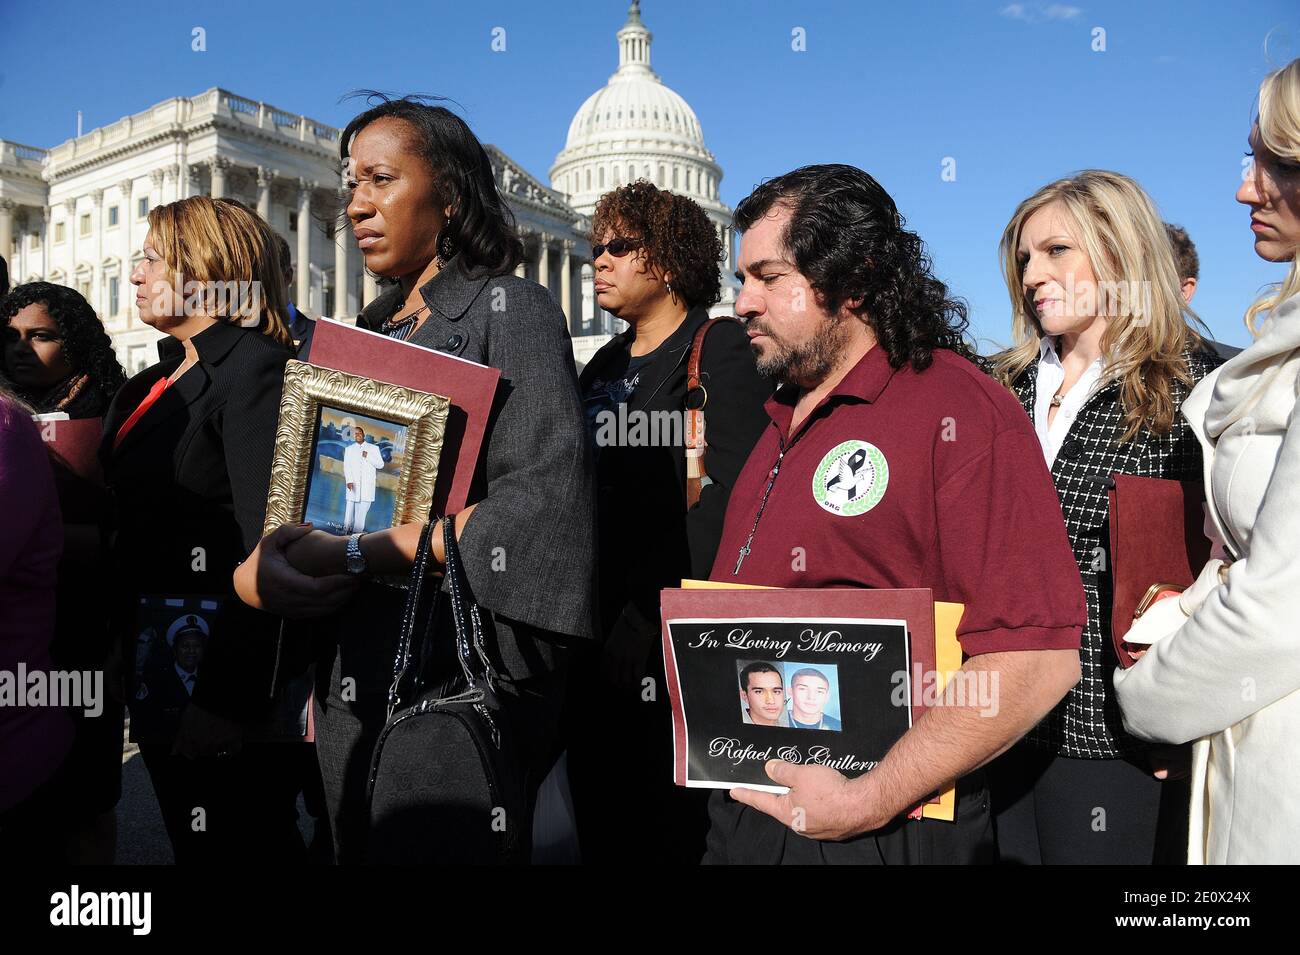 Survivors and family members of victims of gun violence including Pam Bodley (L), holding a picture of her son Tyrell and Jose Guzman (R) holding a picture of his son Guillermo, listen during a news conference held at the House Triangle on Capitol Hill in Washington, DC, USA on December 18, 2012. Photo by Olivier Douliery/ABACAPRESS.COM Stock Photo